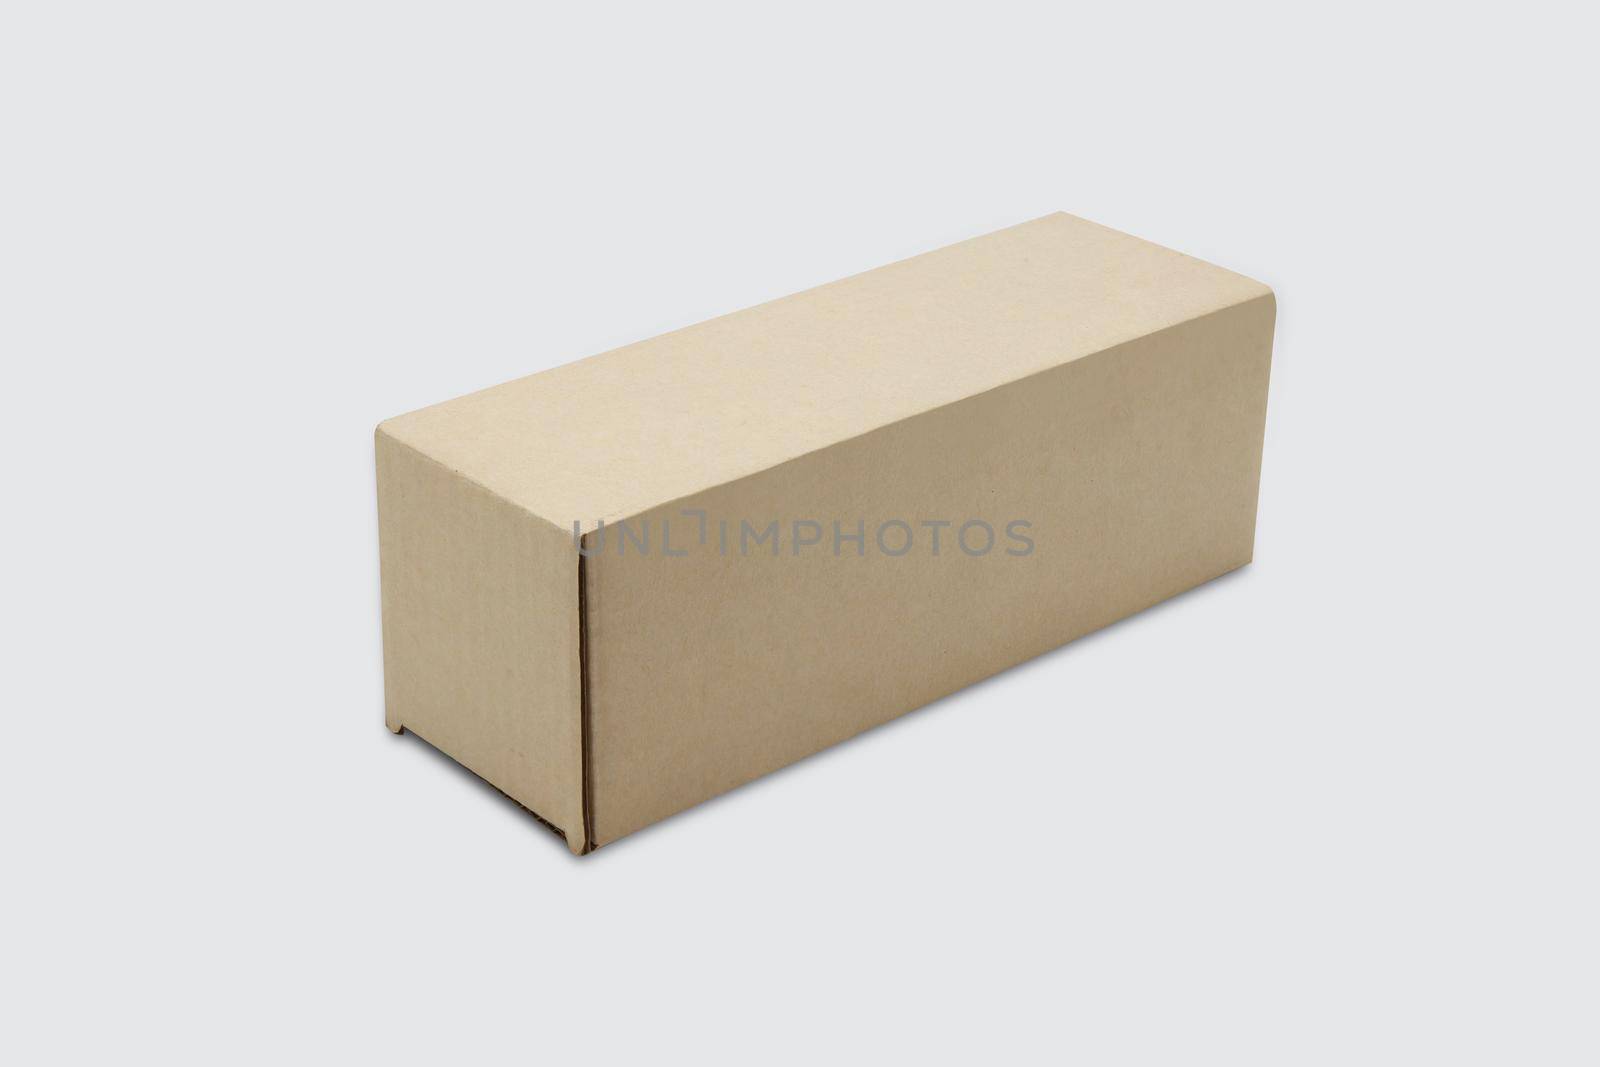 Mockup closed brown paper box isolated on white background, package and container, business with logistic, cardboard with packaging for parcel and delivery service, transportation concept.